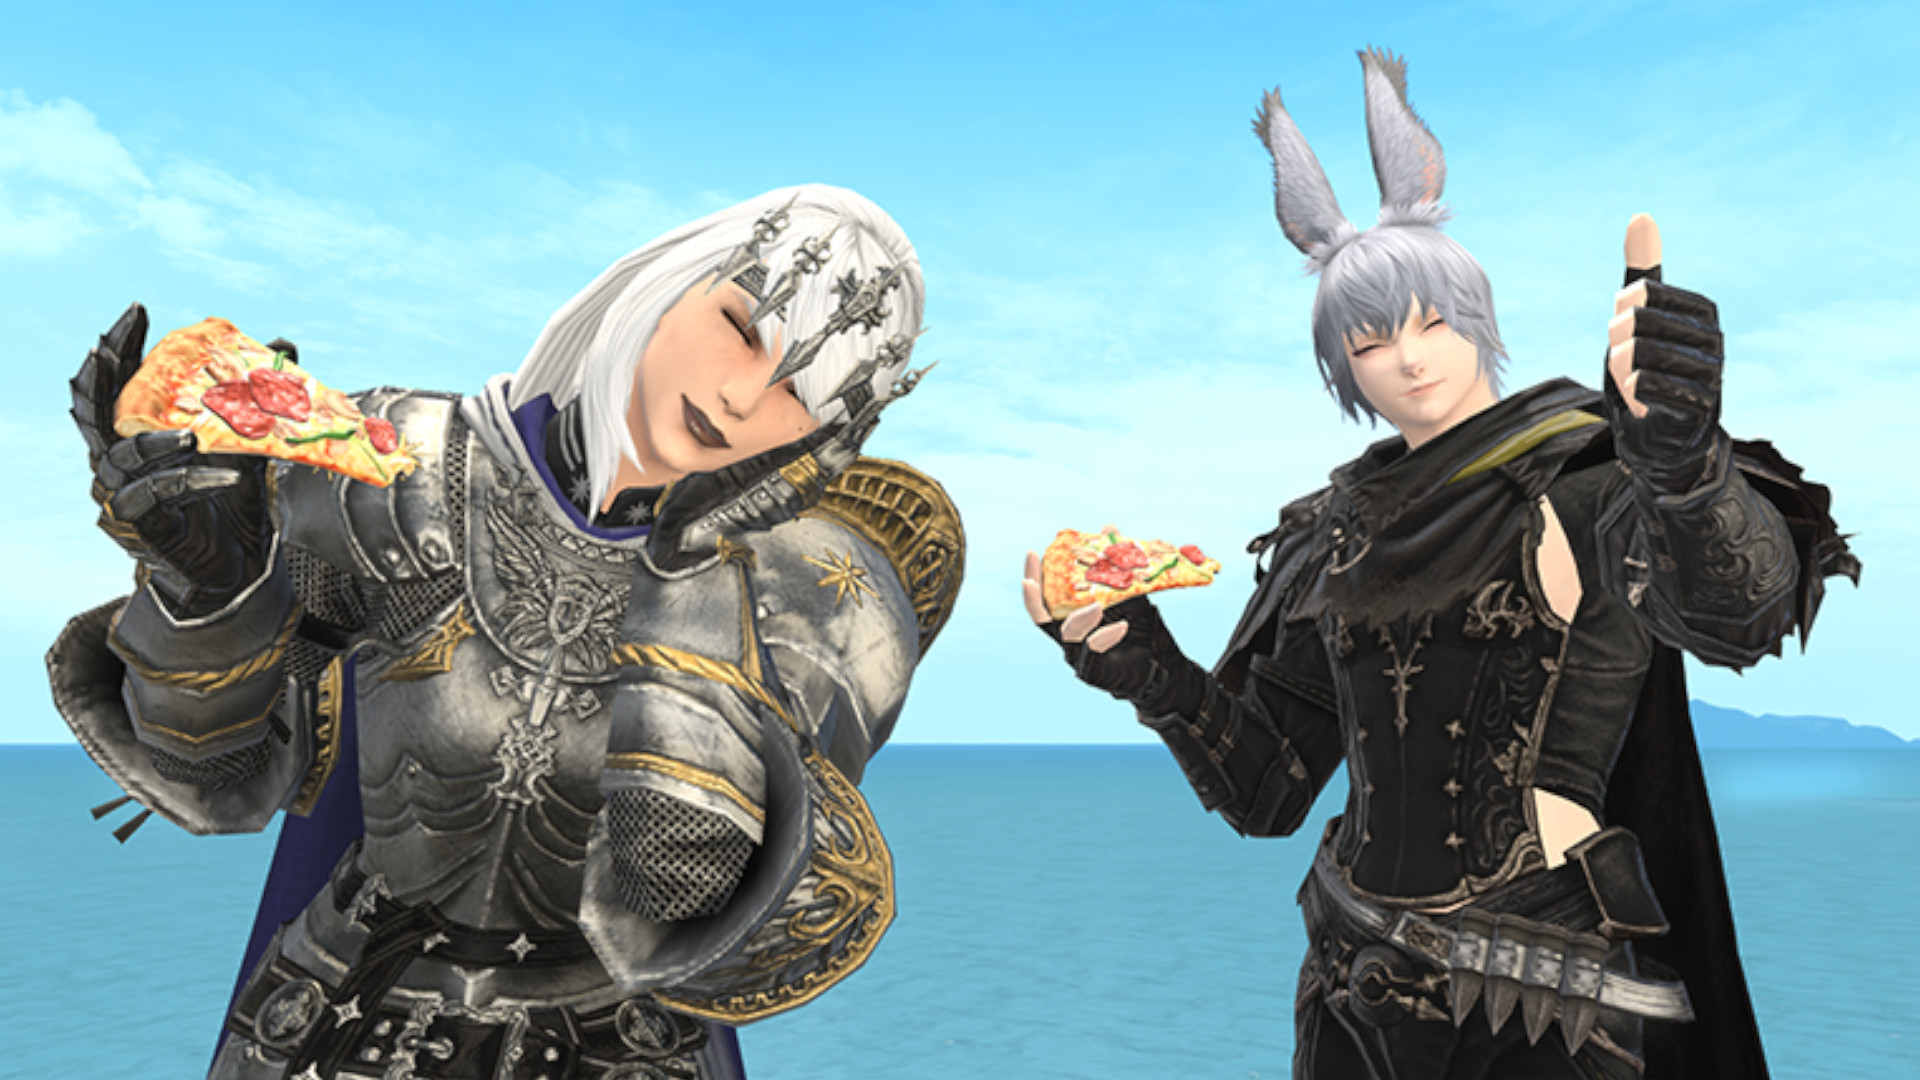 You can now eat pizza in FFXIV while eating pizza in real life